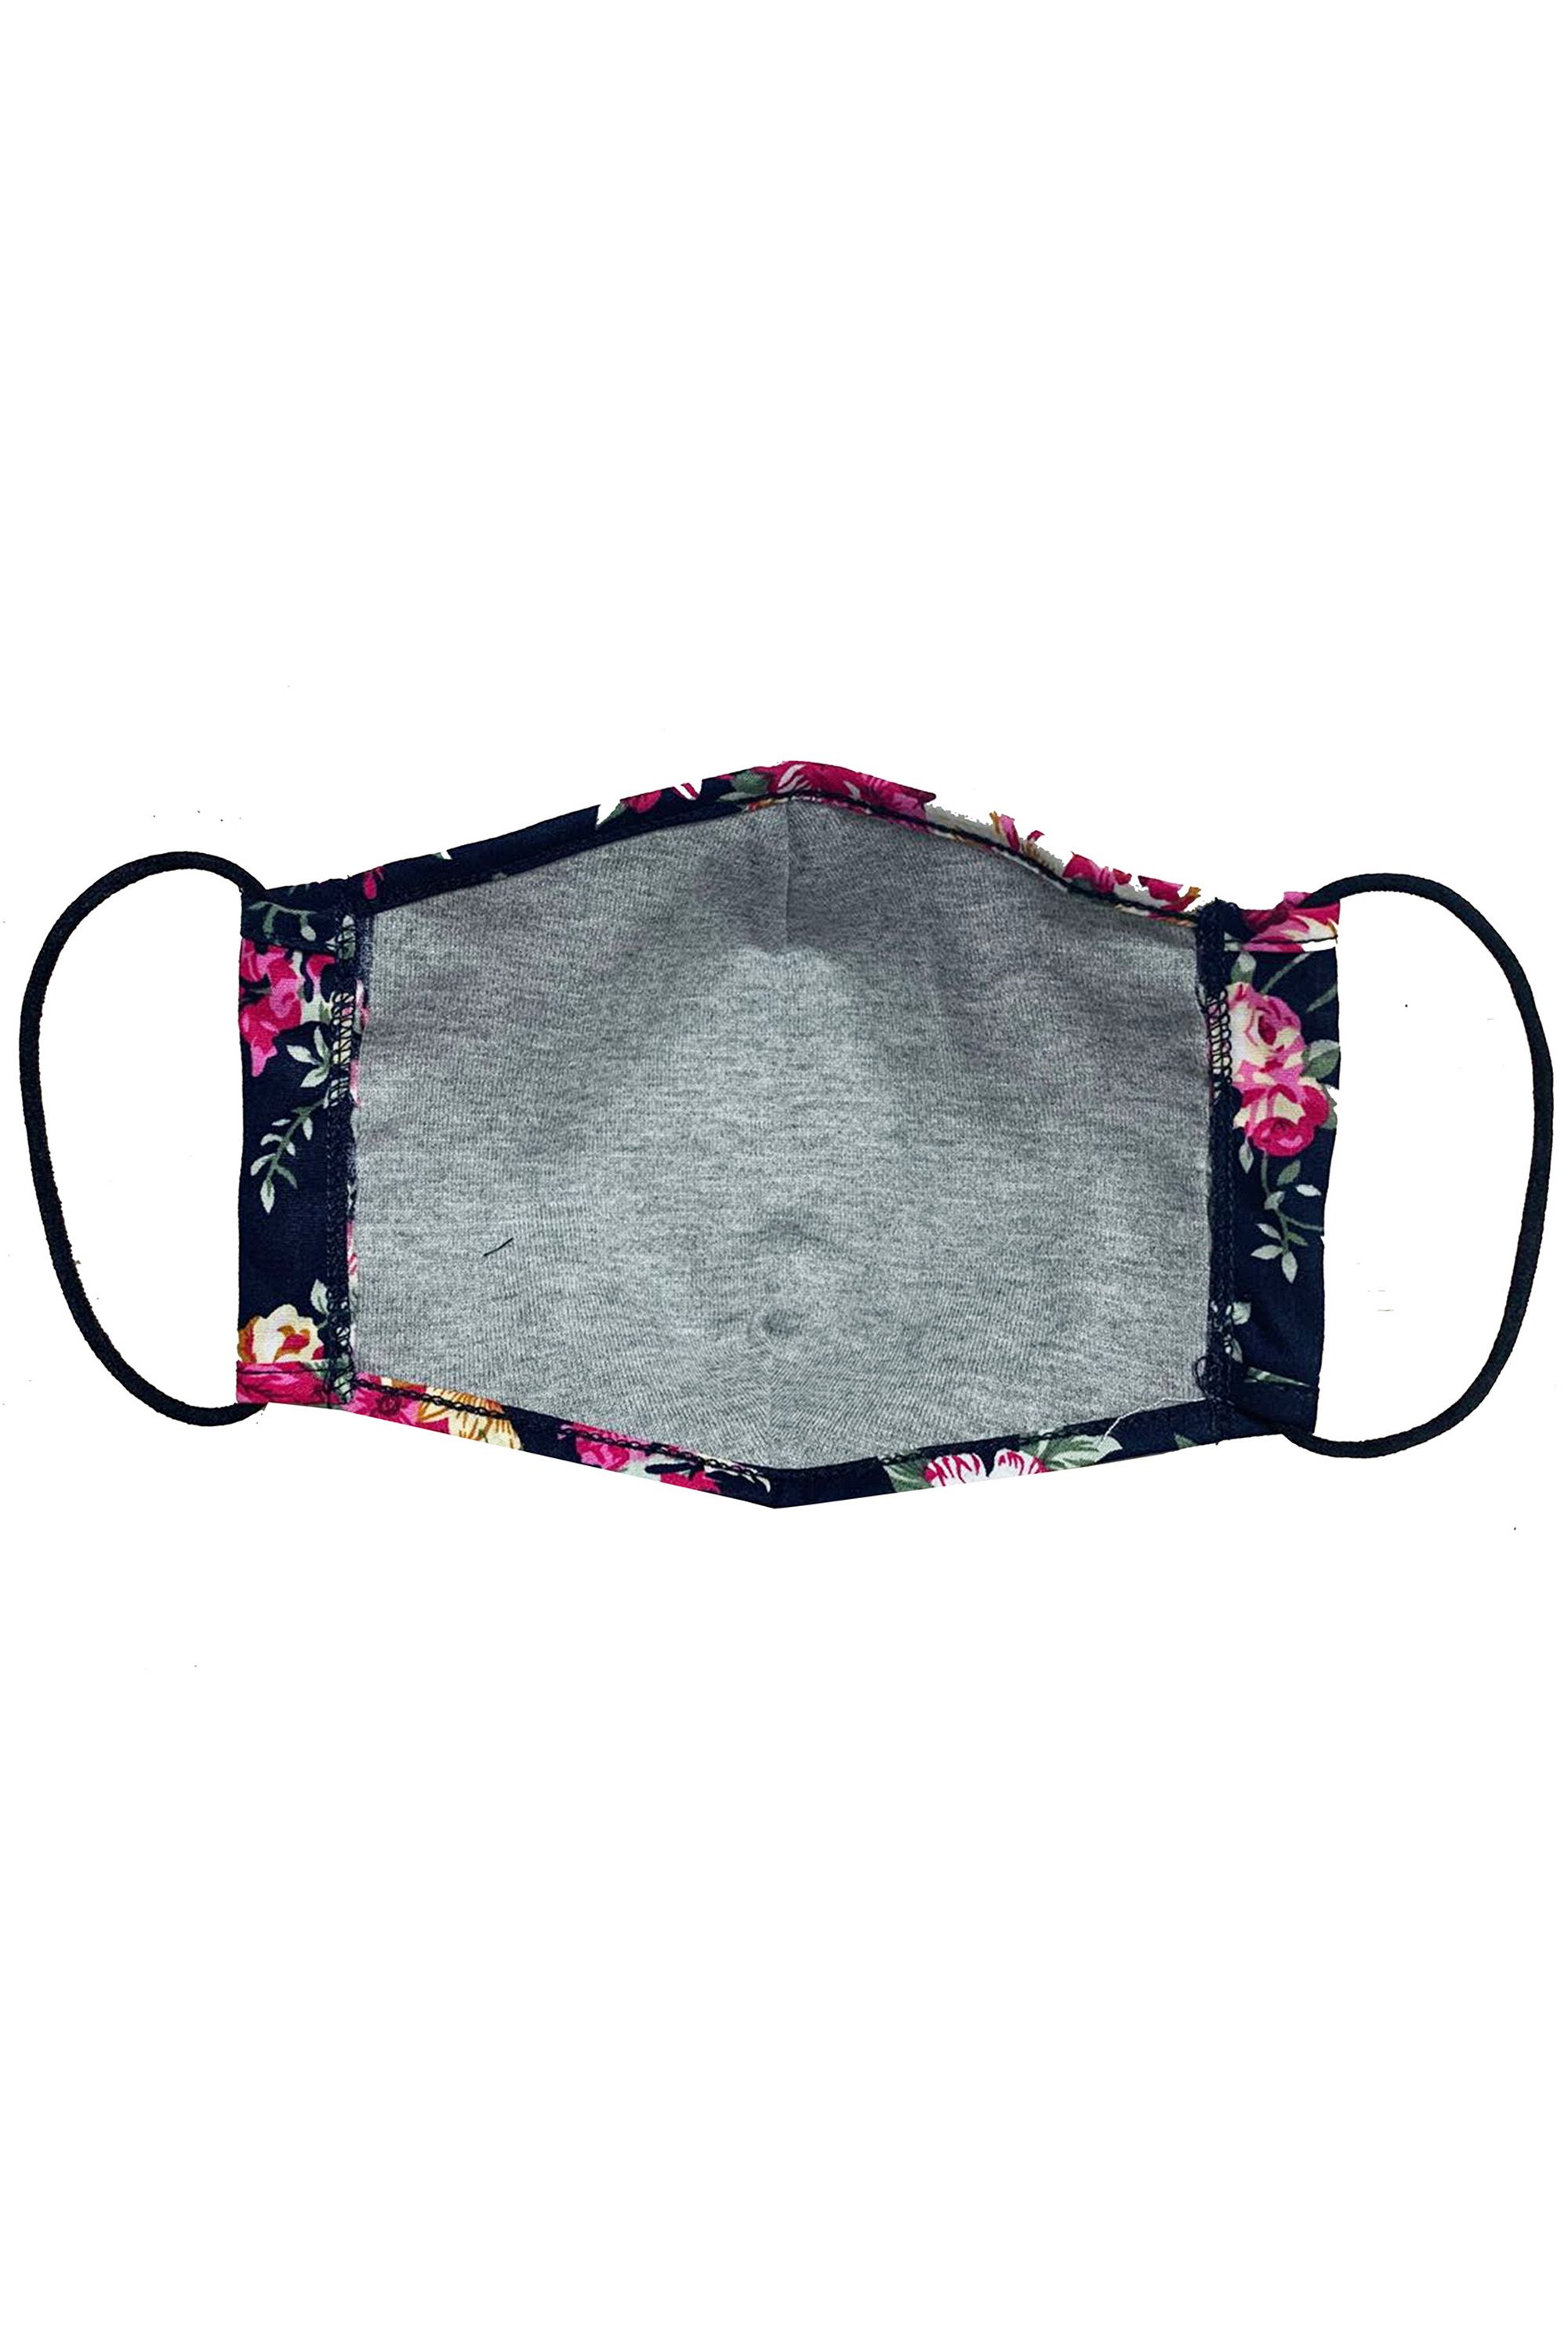 Easily washable and with a floral design, this Daisy Print Face Covering is comfortable to wear. Made from soft-touch cotton, it's cut from the end of our fabric rolls, so it's sustainable and kind to the planet.Please remember it is a non-medical mask and not PPE. Wash your hands before and after putting on the covering. ; One Pound from each covering is donated to Sufra, a charity that supports and provides food for people in extreme poverty. 100% Cotton, Lining:100% Cotton